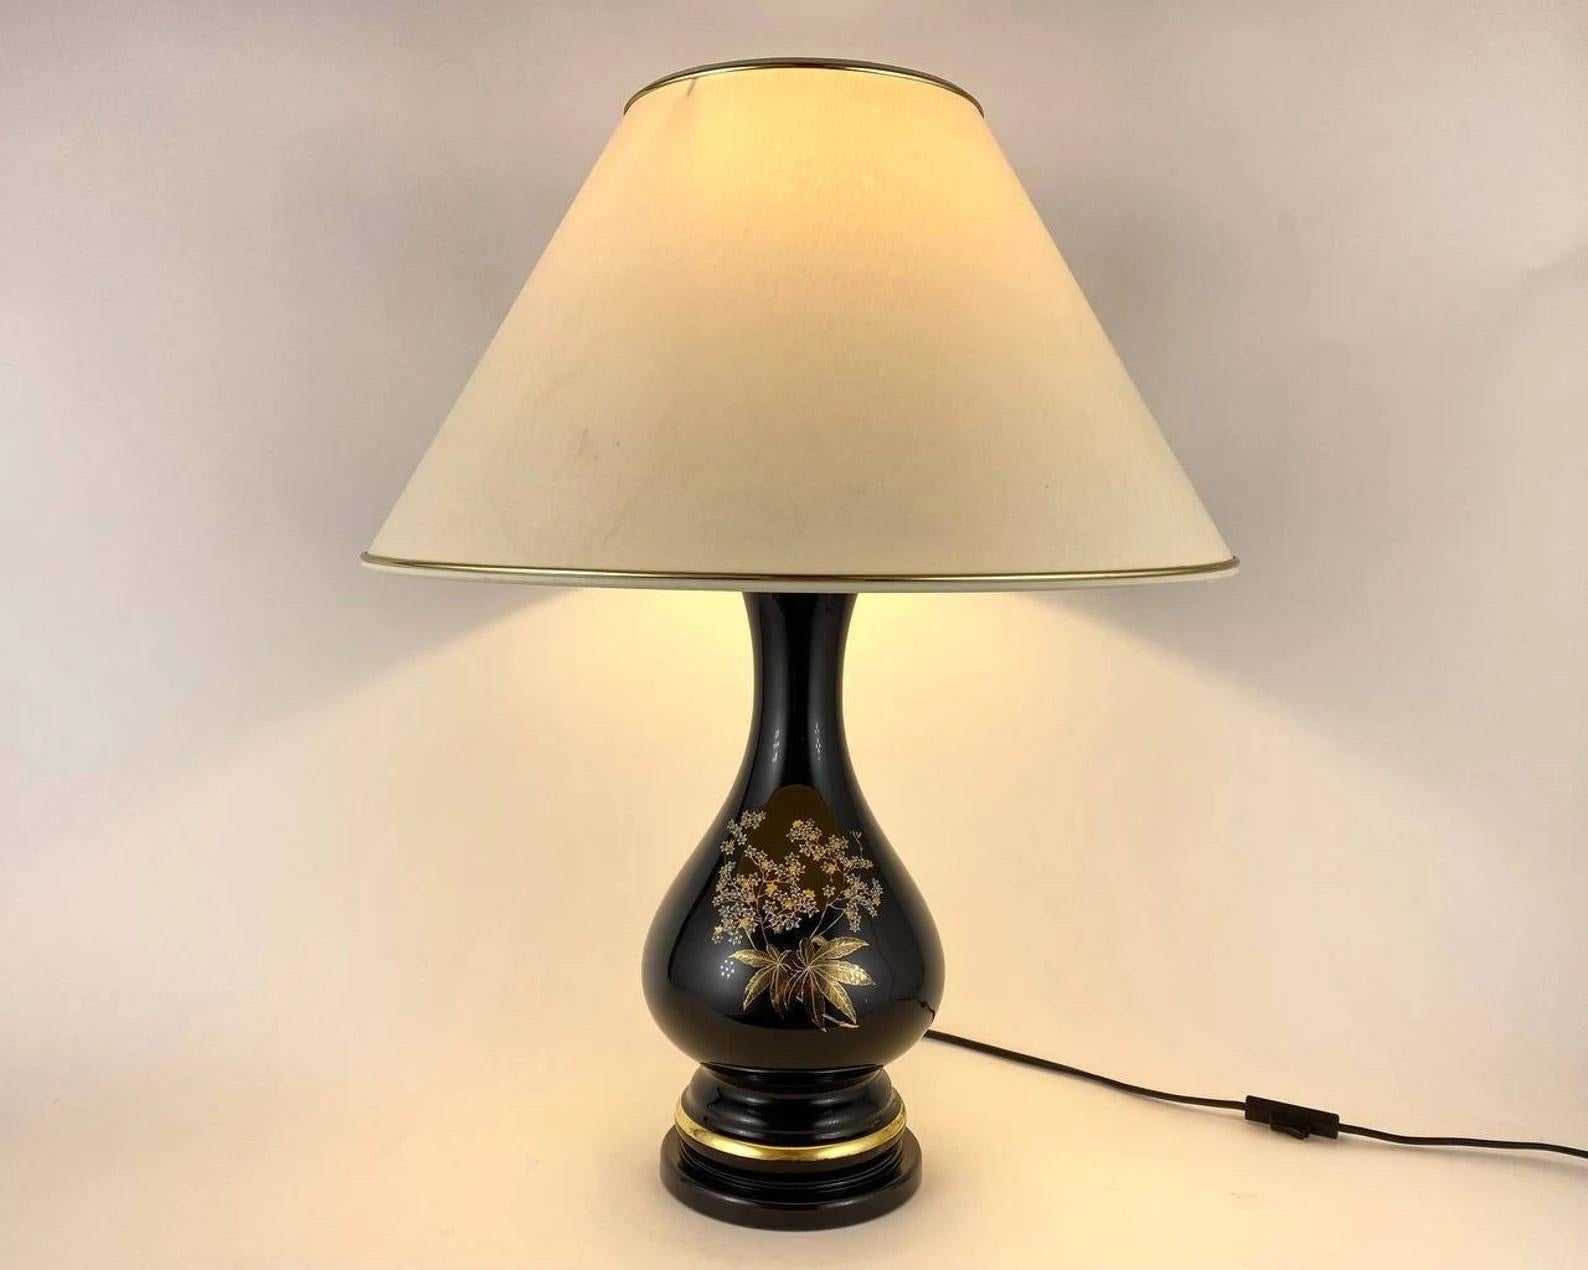 Large Vintage French table lamp combine functionality with beauty and sculptural perfection. In this design of classic shapes, the base of a vase decorated with gilt and white colored branch with flowers and leaves.

The contrast between the black